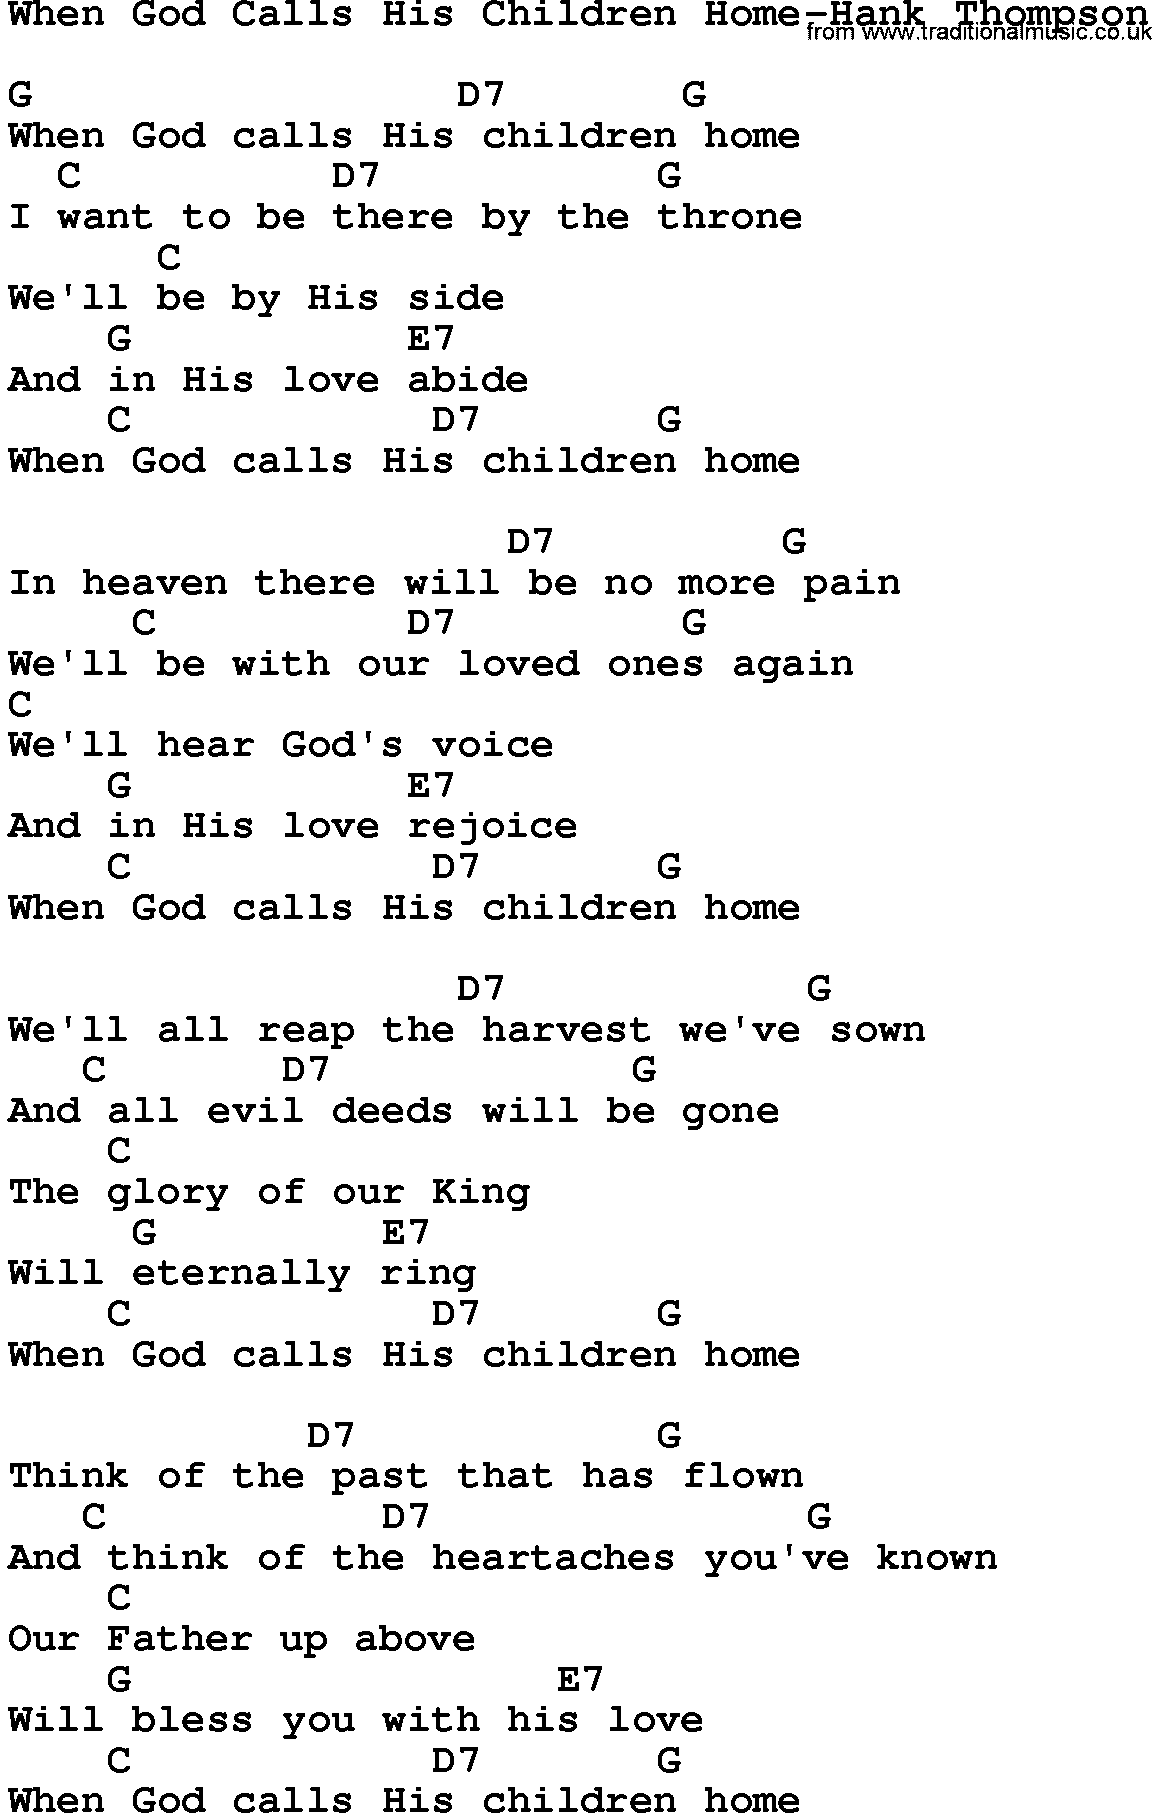 Country music song: When God Calls His Children Home-Hank Thompson lyrics and chords